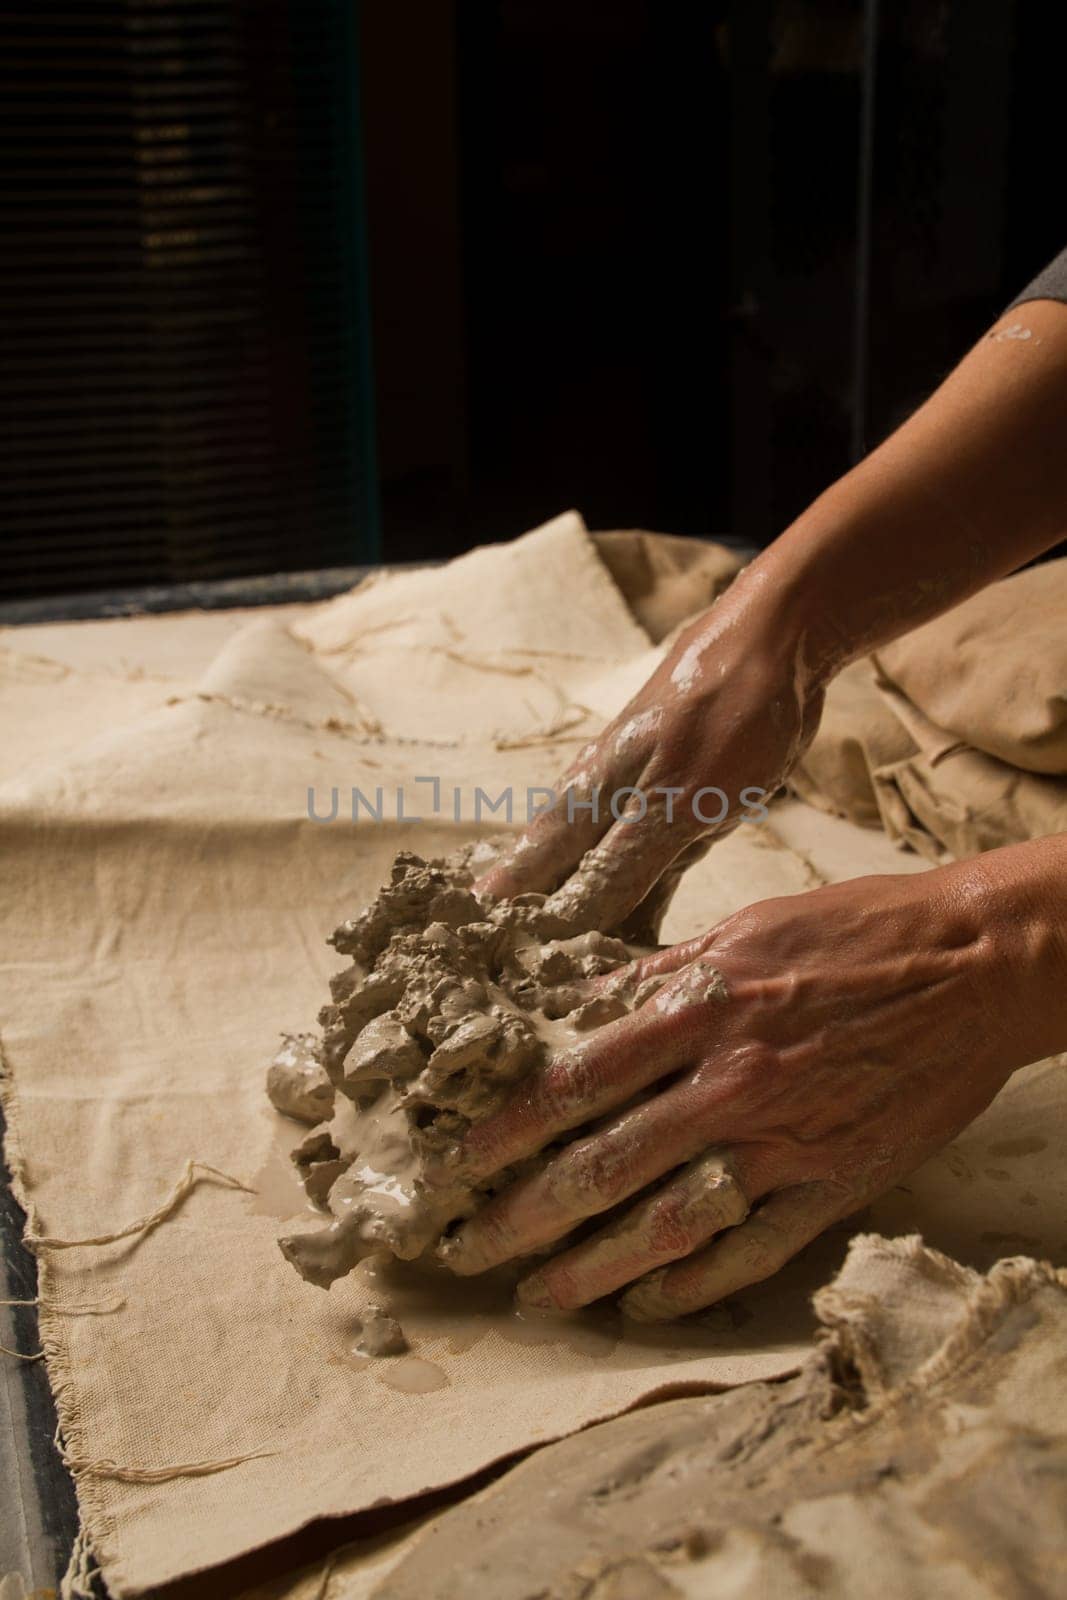 Craftsman shaping wet clay for pottery creation in Fort Wayne, Indiana studio